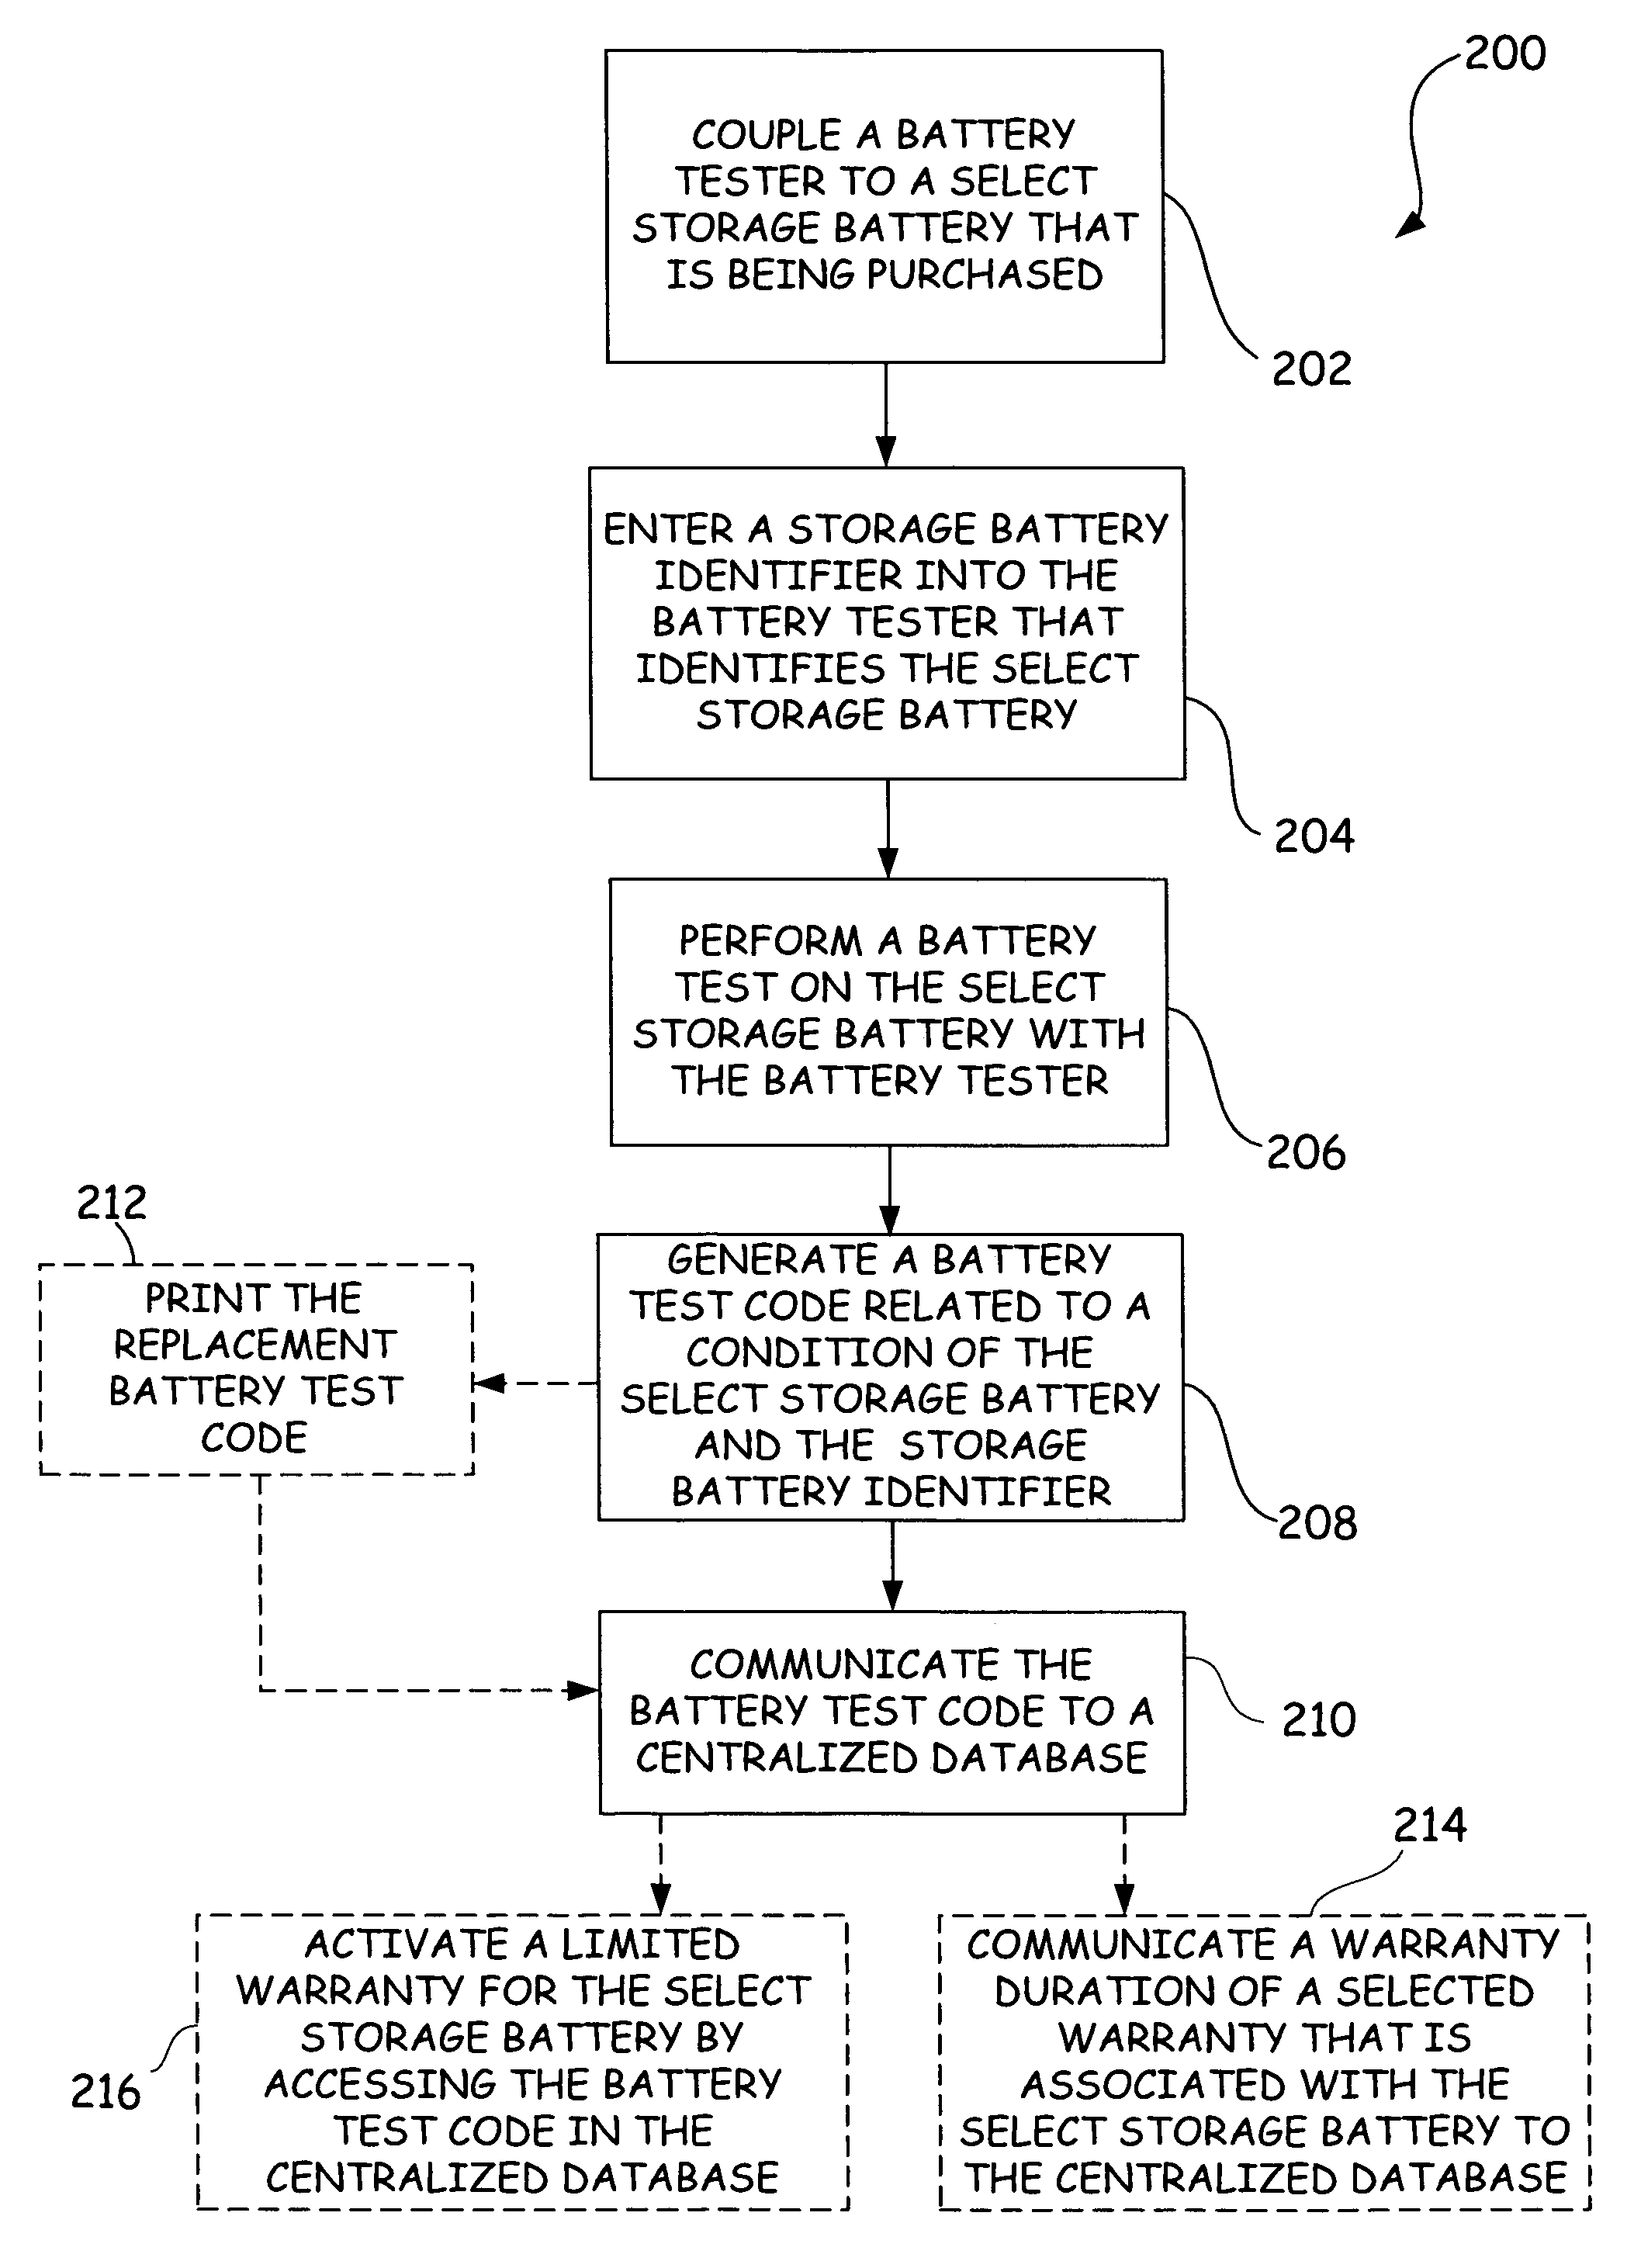 Centralized data storage of condition of a storage battery at its point of sale